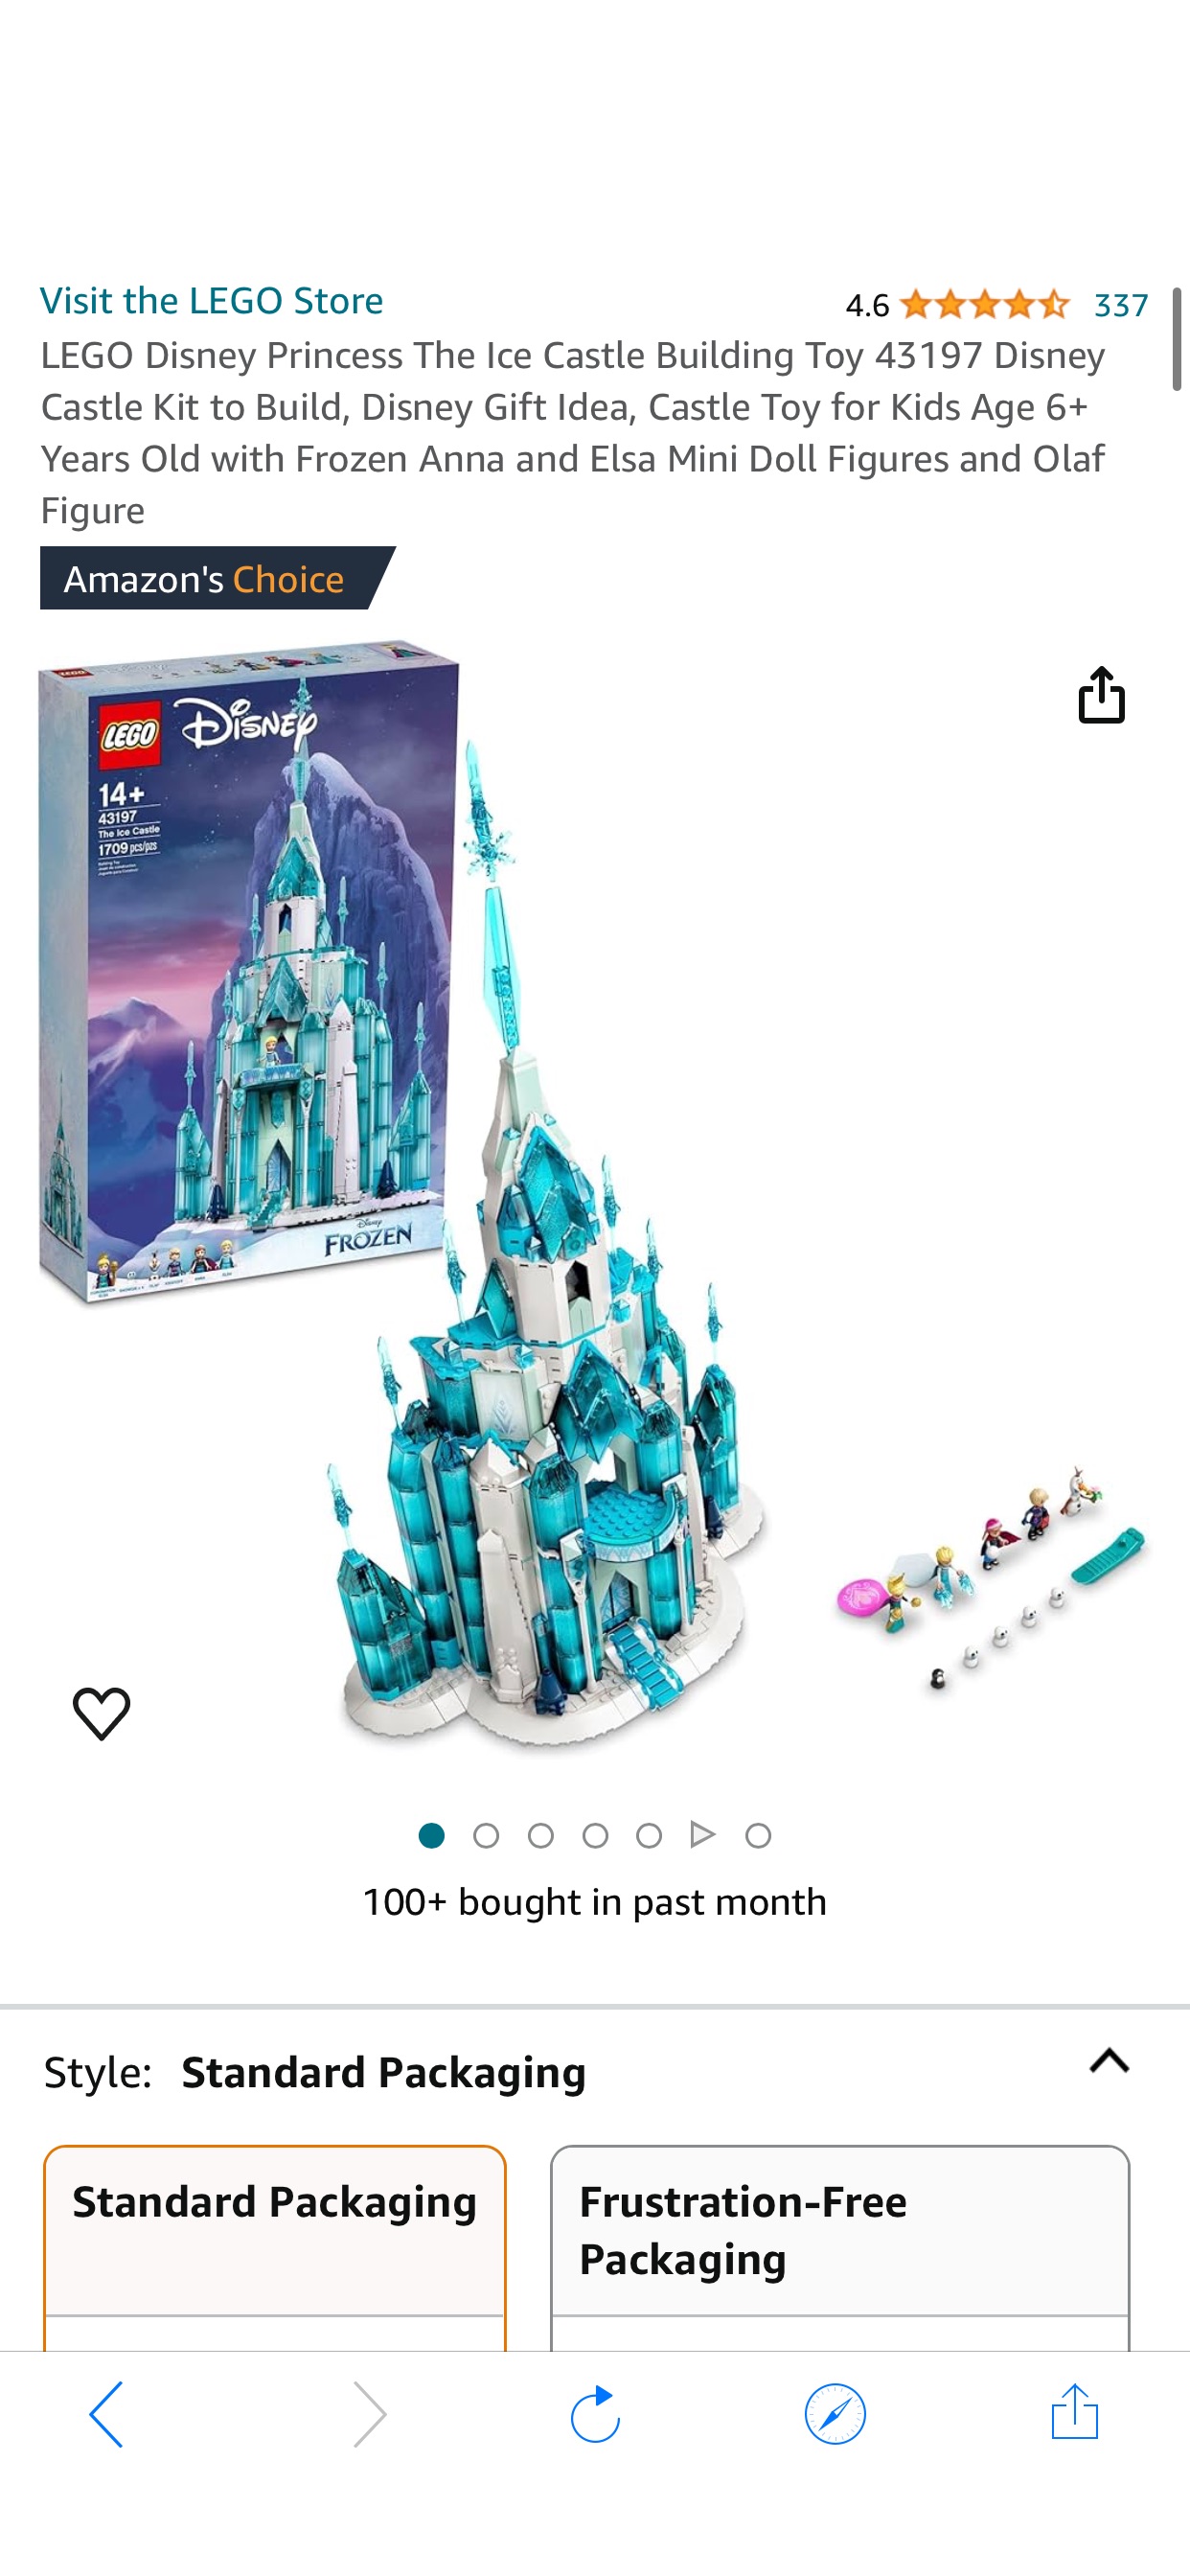 Amazon.com: LEGO Disney Princess The Ice Castle Building Toy 43197 Disney Castle Kit to Build, Disney Gift Idea, Castle Toy for Kids Age 6+ Years Old with Frozen Anna and Elsa Mini Doll Figures and Ol